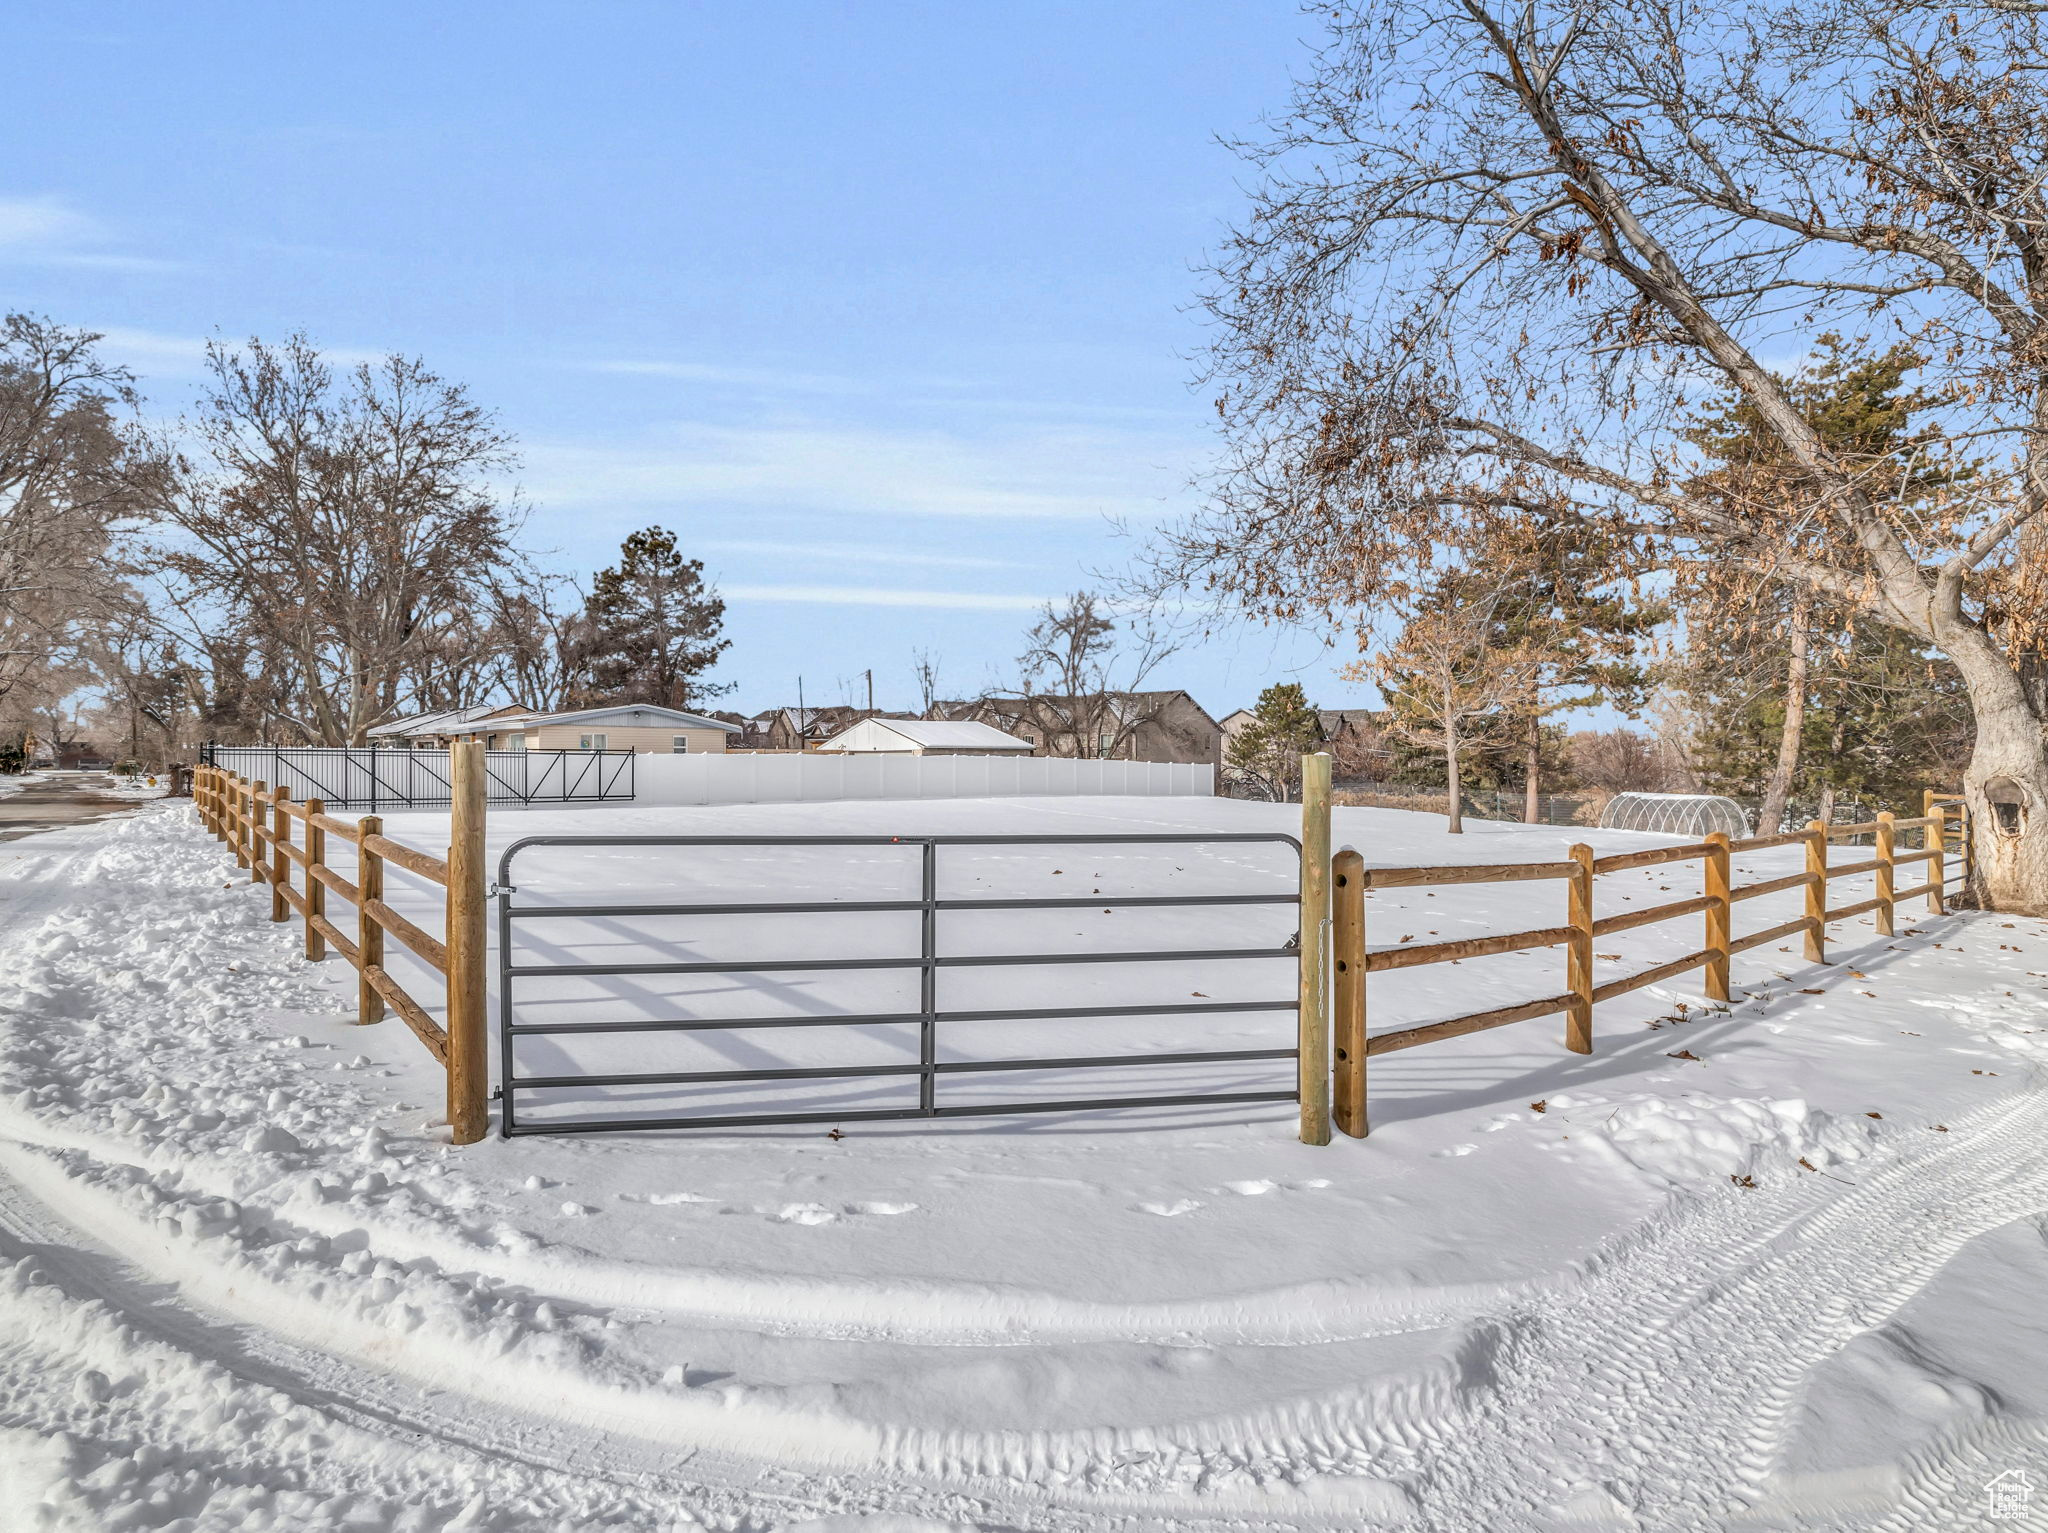 Fully fenced riding arena just west of the home for your horses